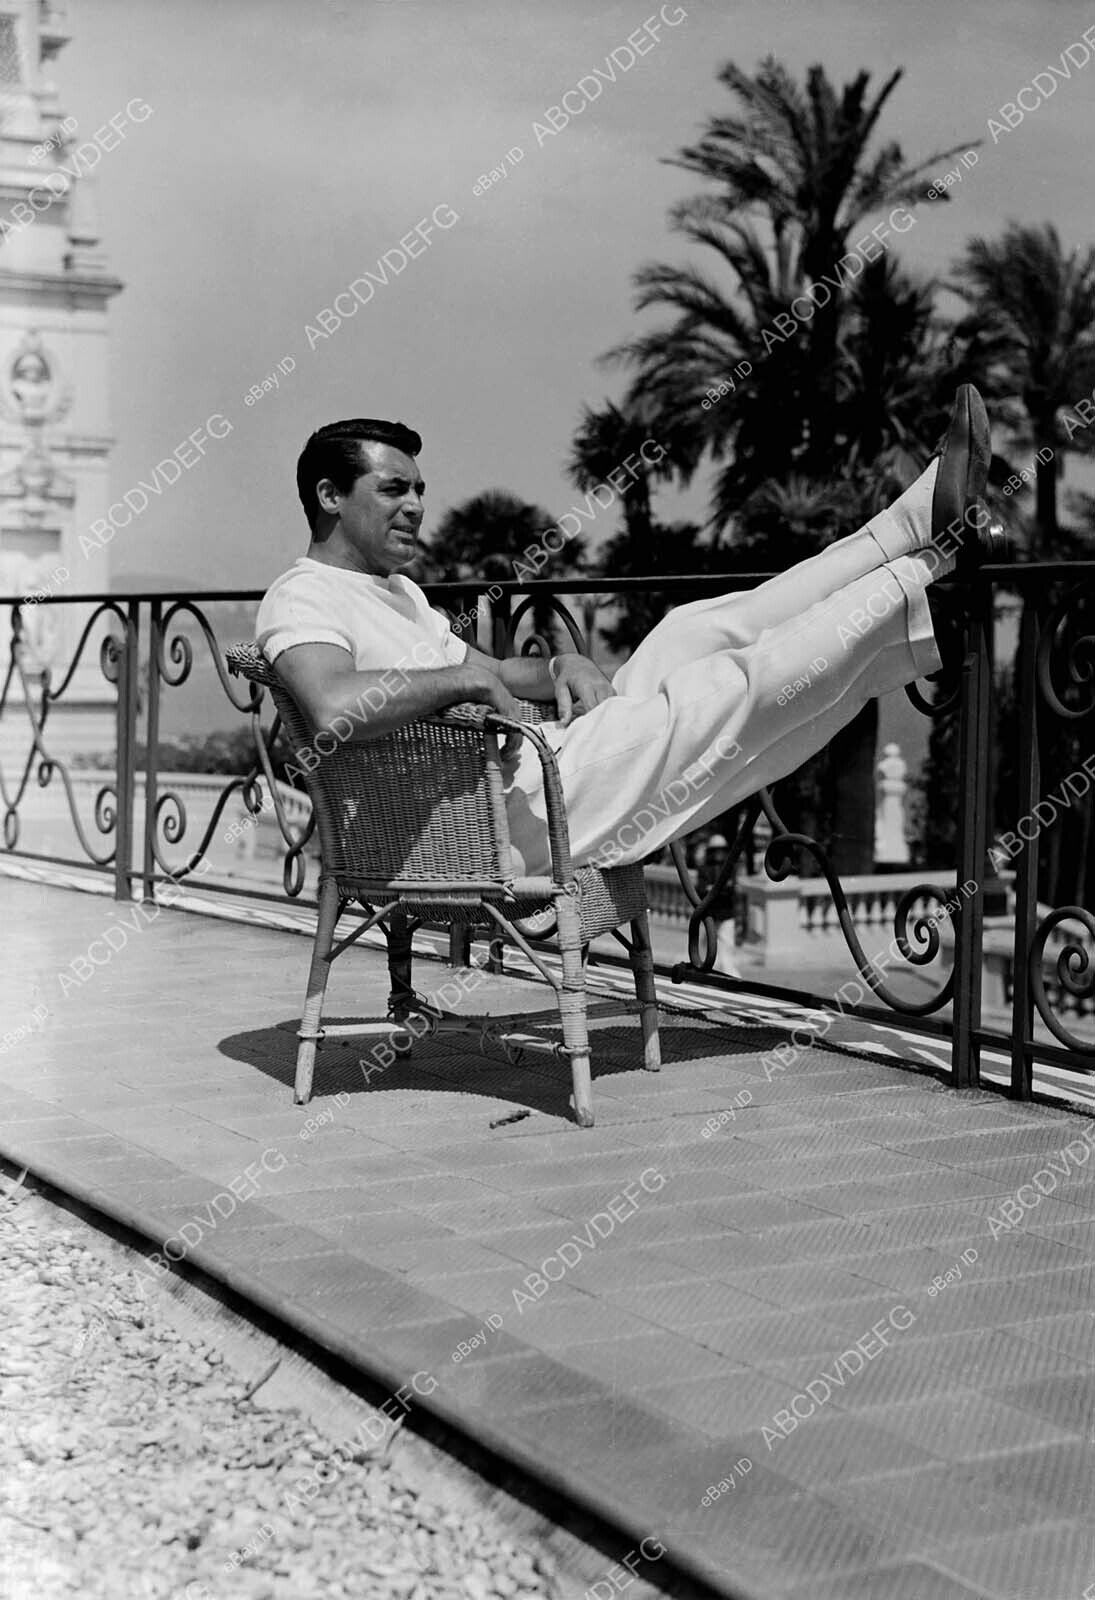 8b20-6180 candid Cary Grant relaxes in the backyard 8b20-6180 8b20-6180